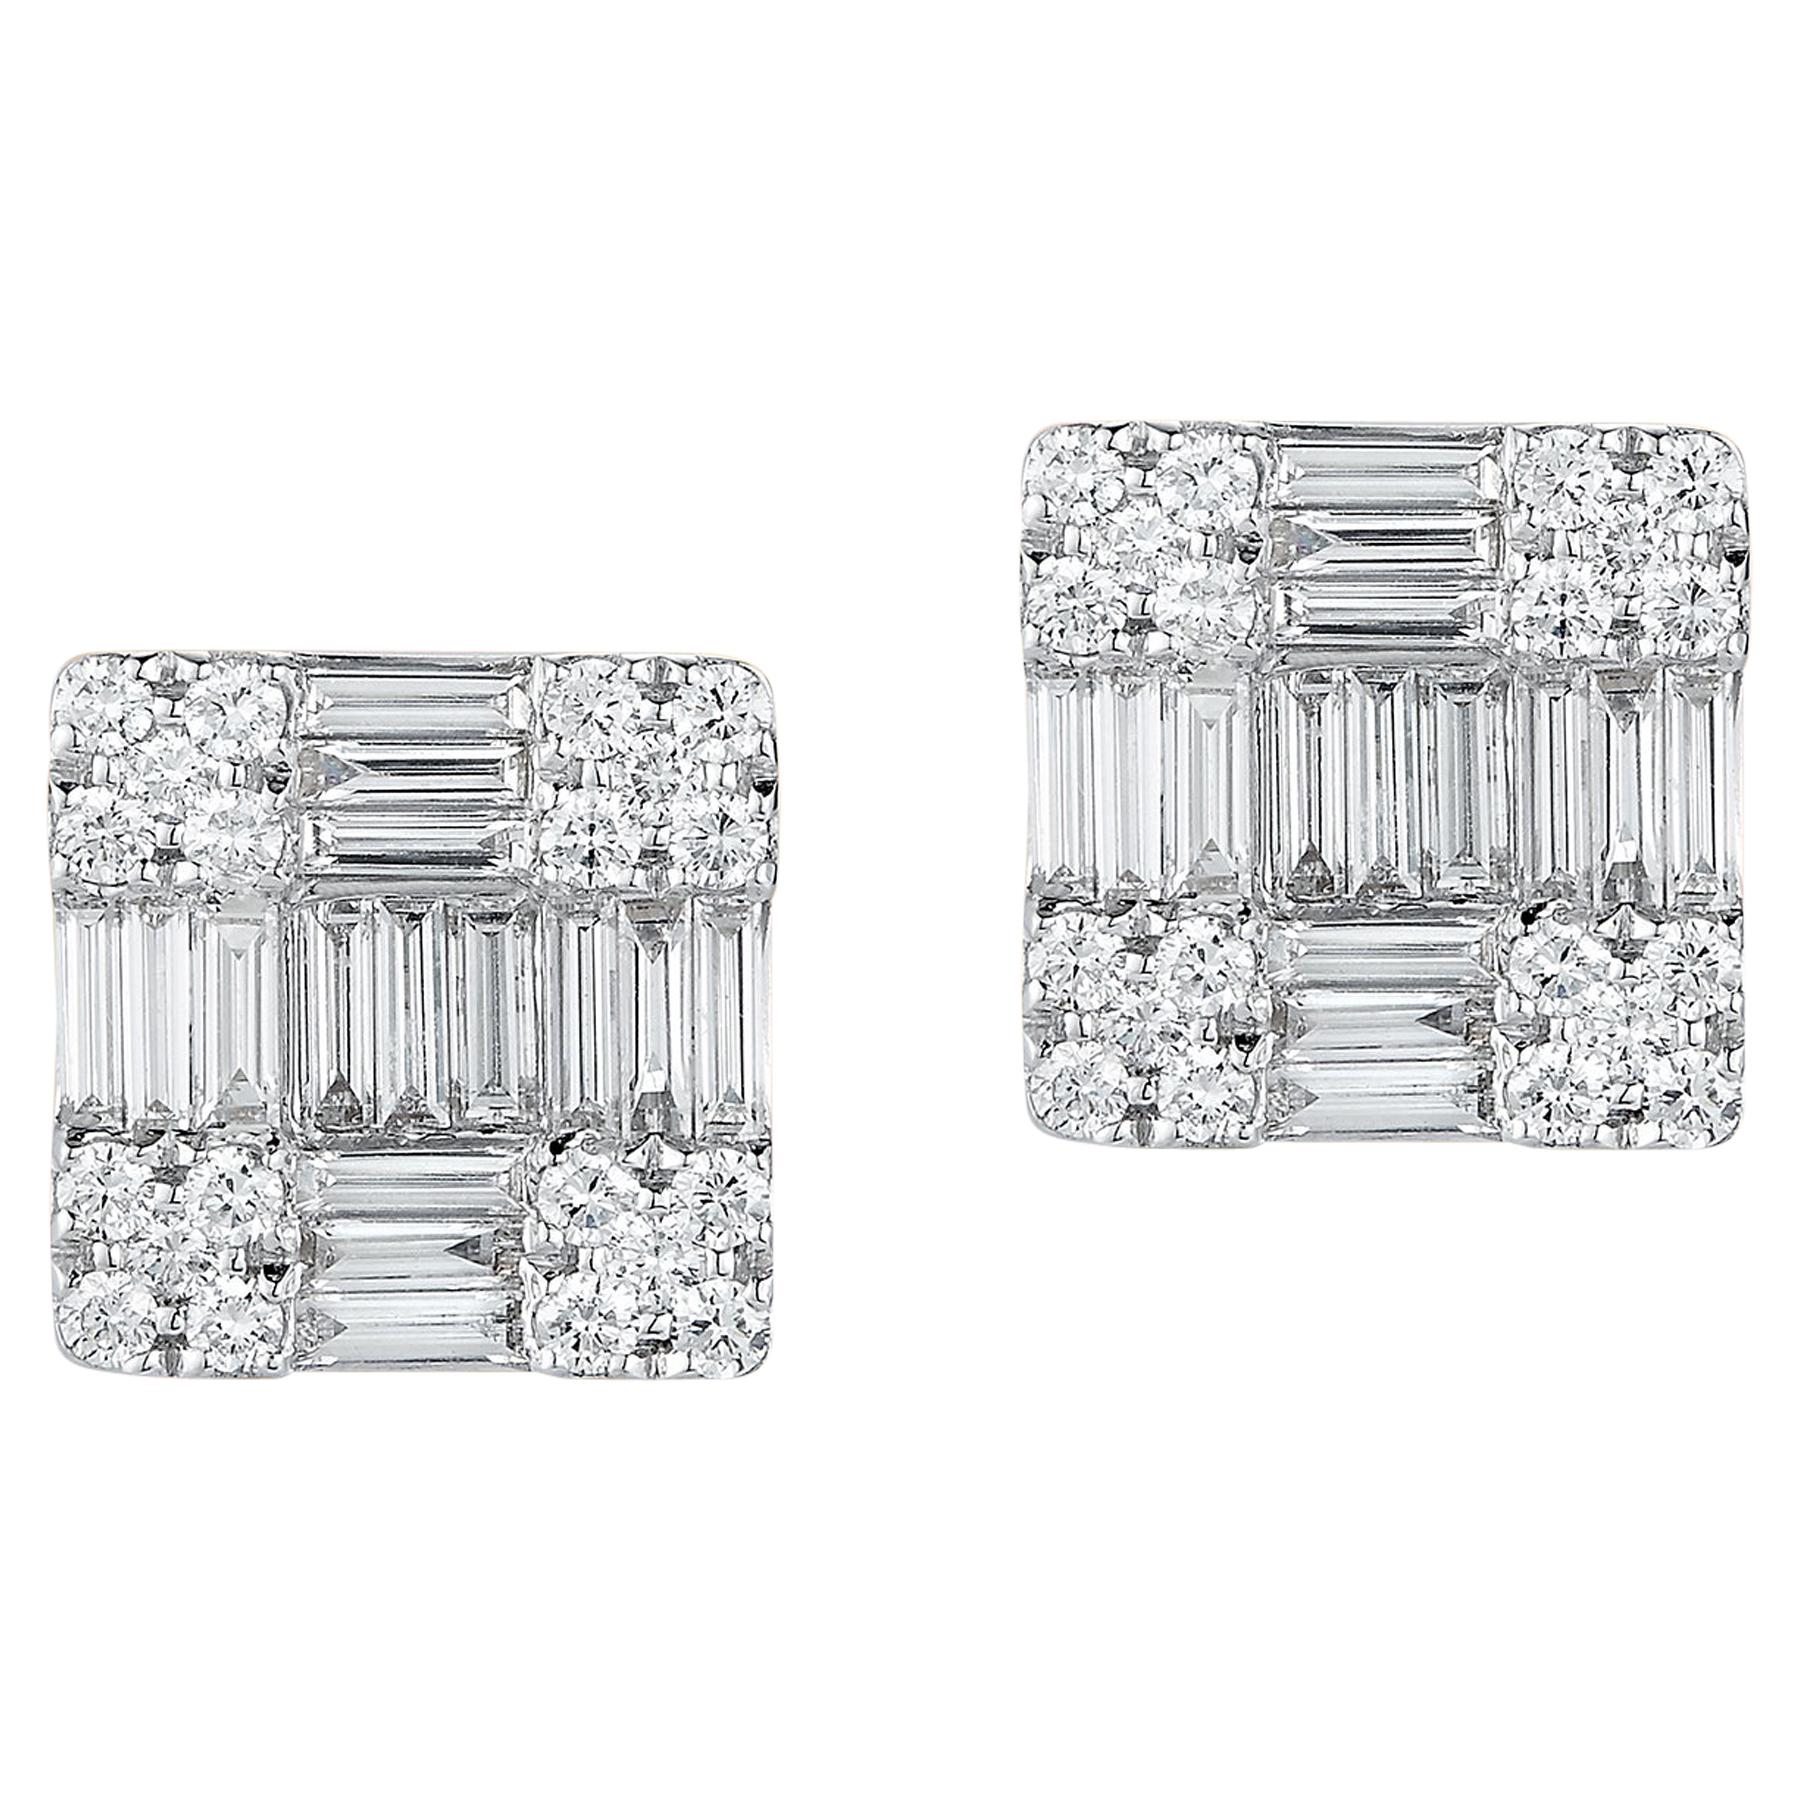 18 Karat White Gold Square-Shaped Earrings with 70 Diamonds